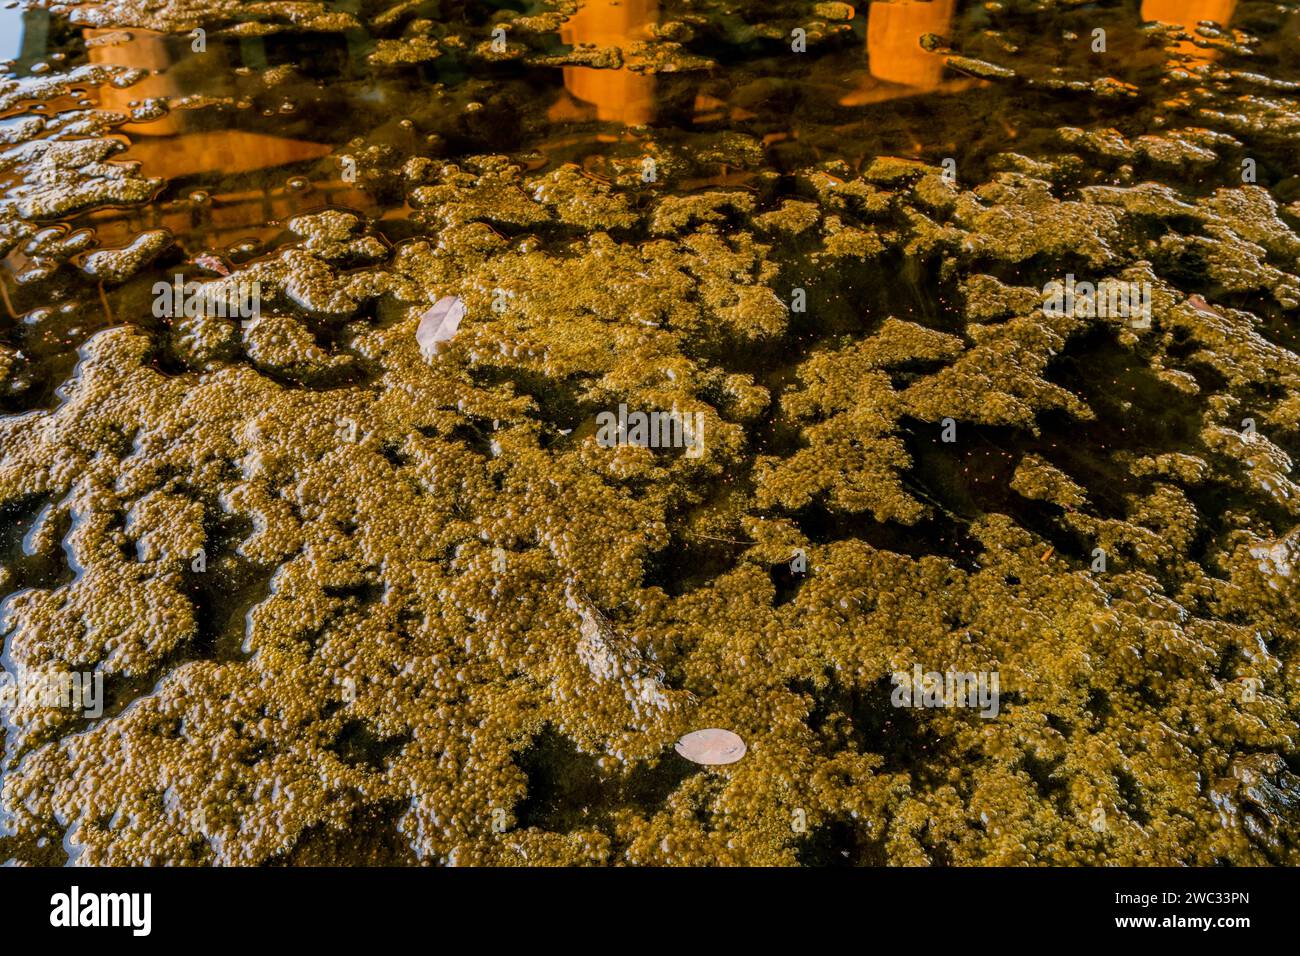 Layer of frog eggs on top of river with reflection of bridge support columns in water Stock Photo